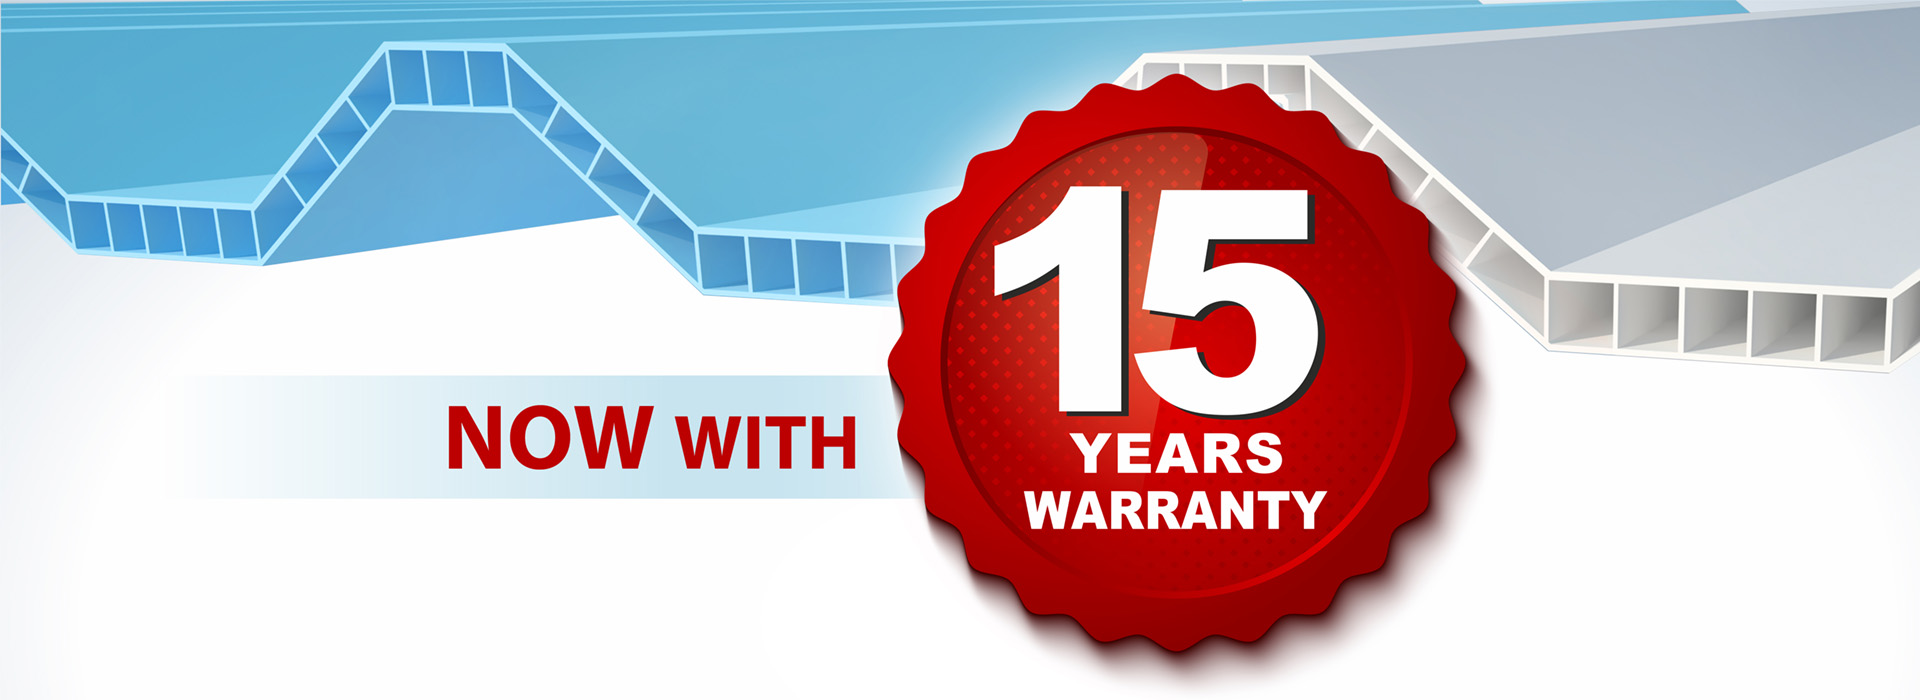 Atap Dingin ROOFTOP Now With 15 YEARS Warranty!